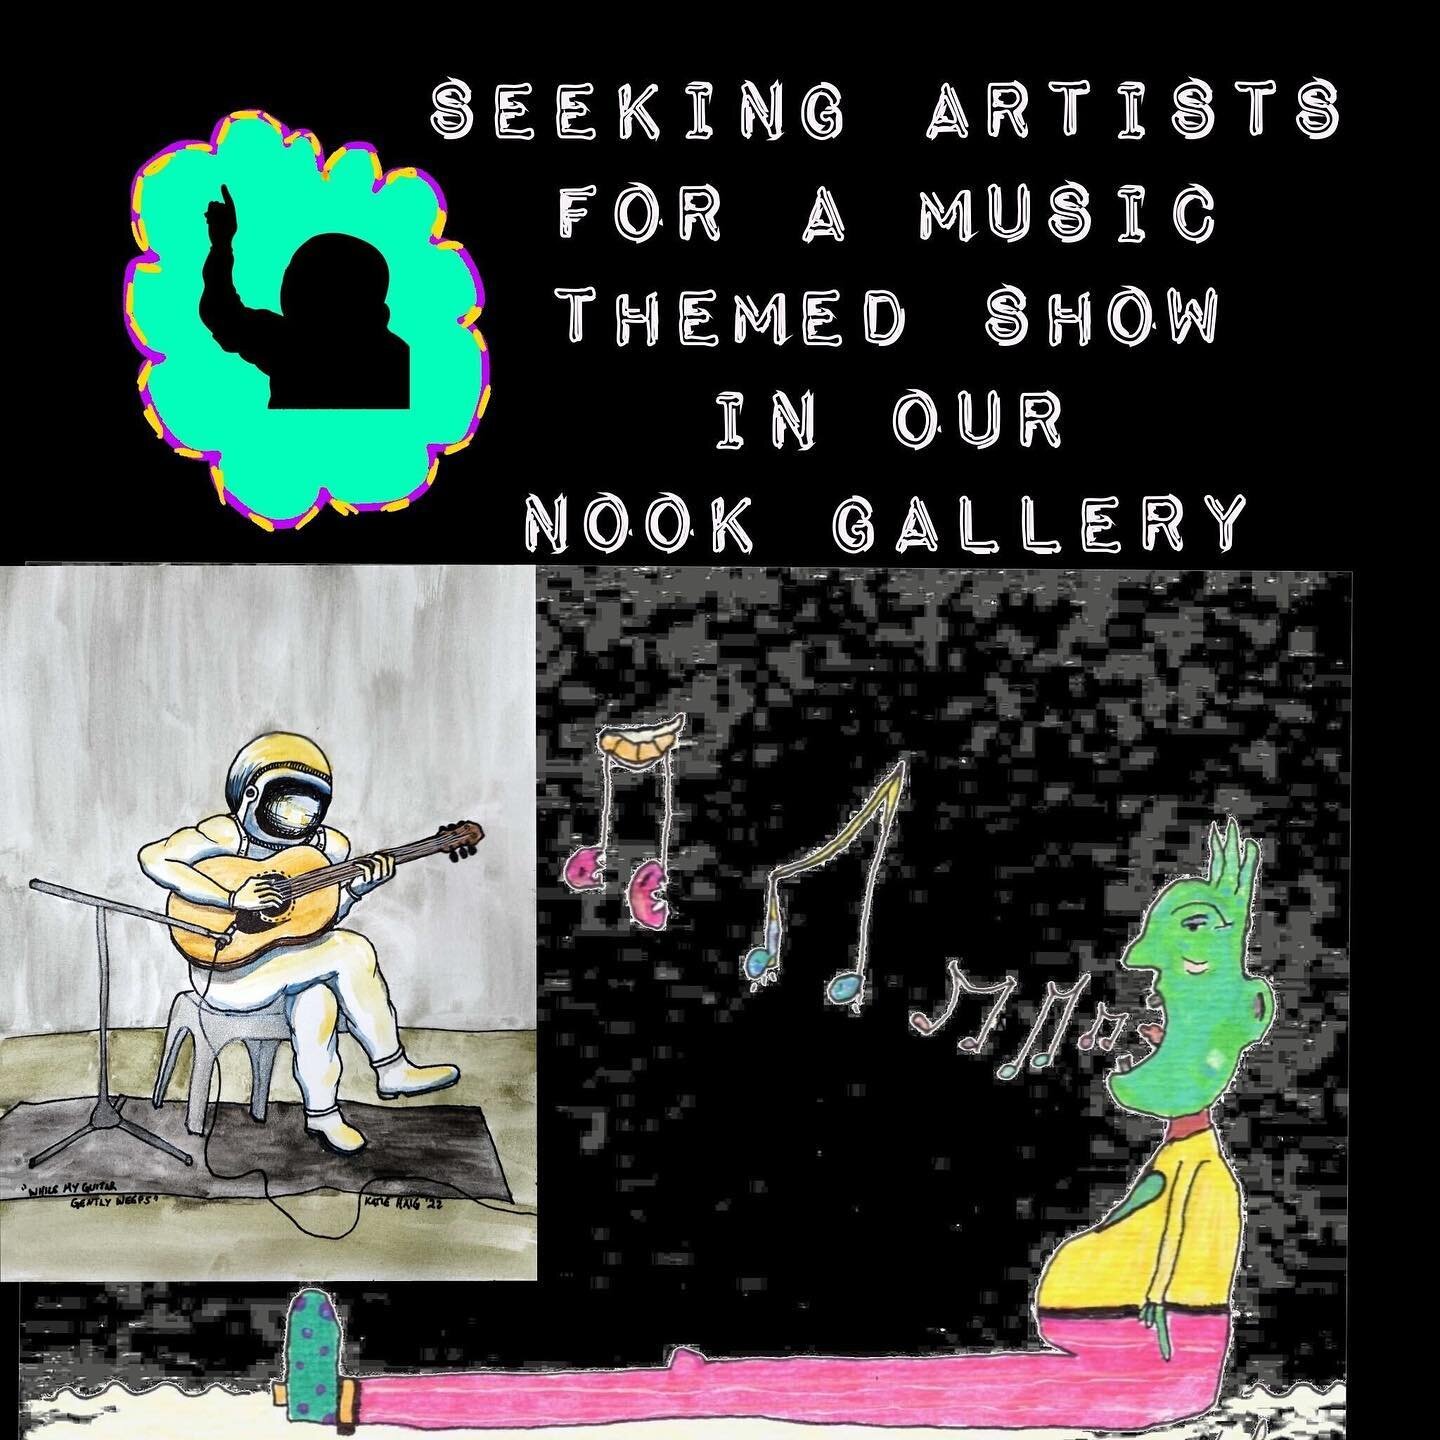 Calling all artists! Common Folk is curating a musical themed group show called, Listen To The Art.  We would love to display your art in our Nook Gallery!!

Please email kkdesigns33@yahoo.com with links to your work or pictures if you are interested